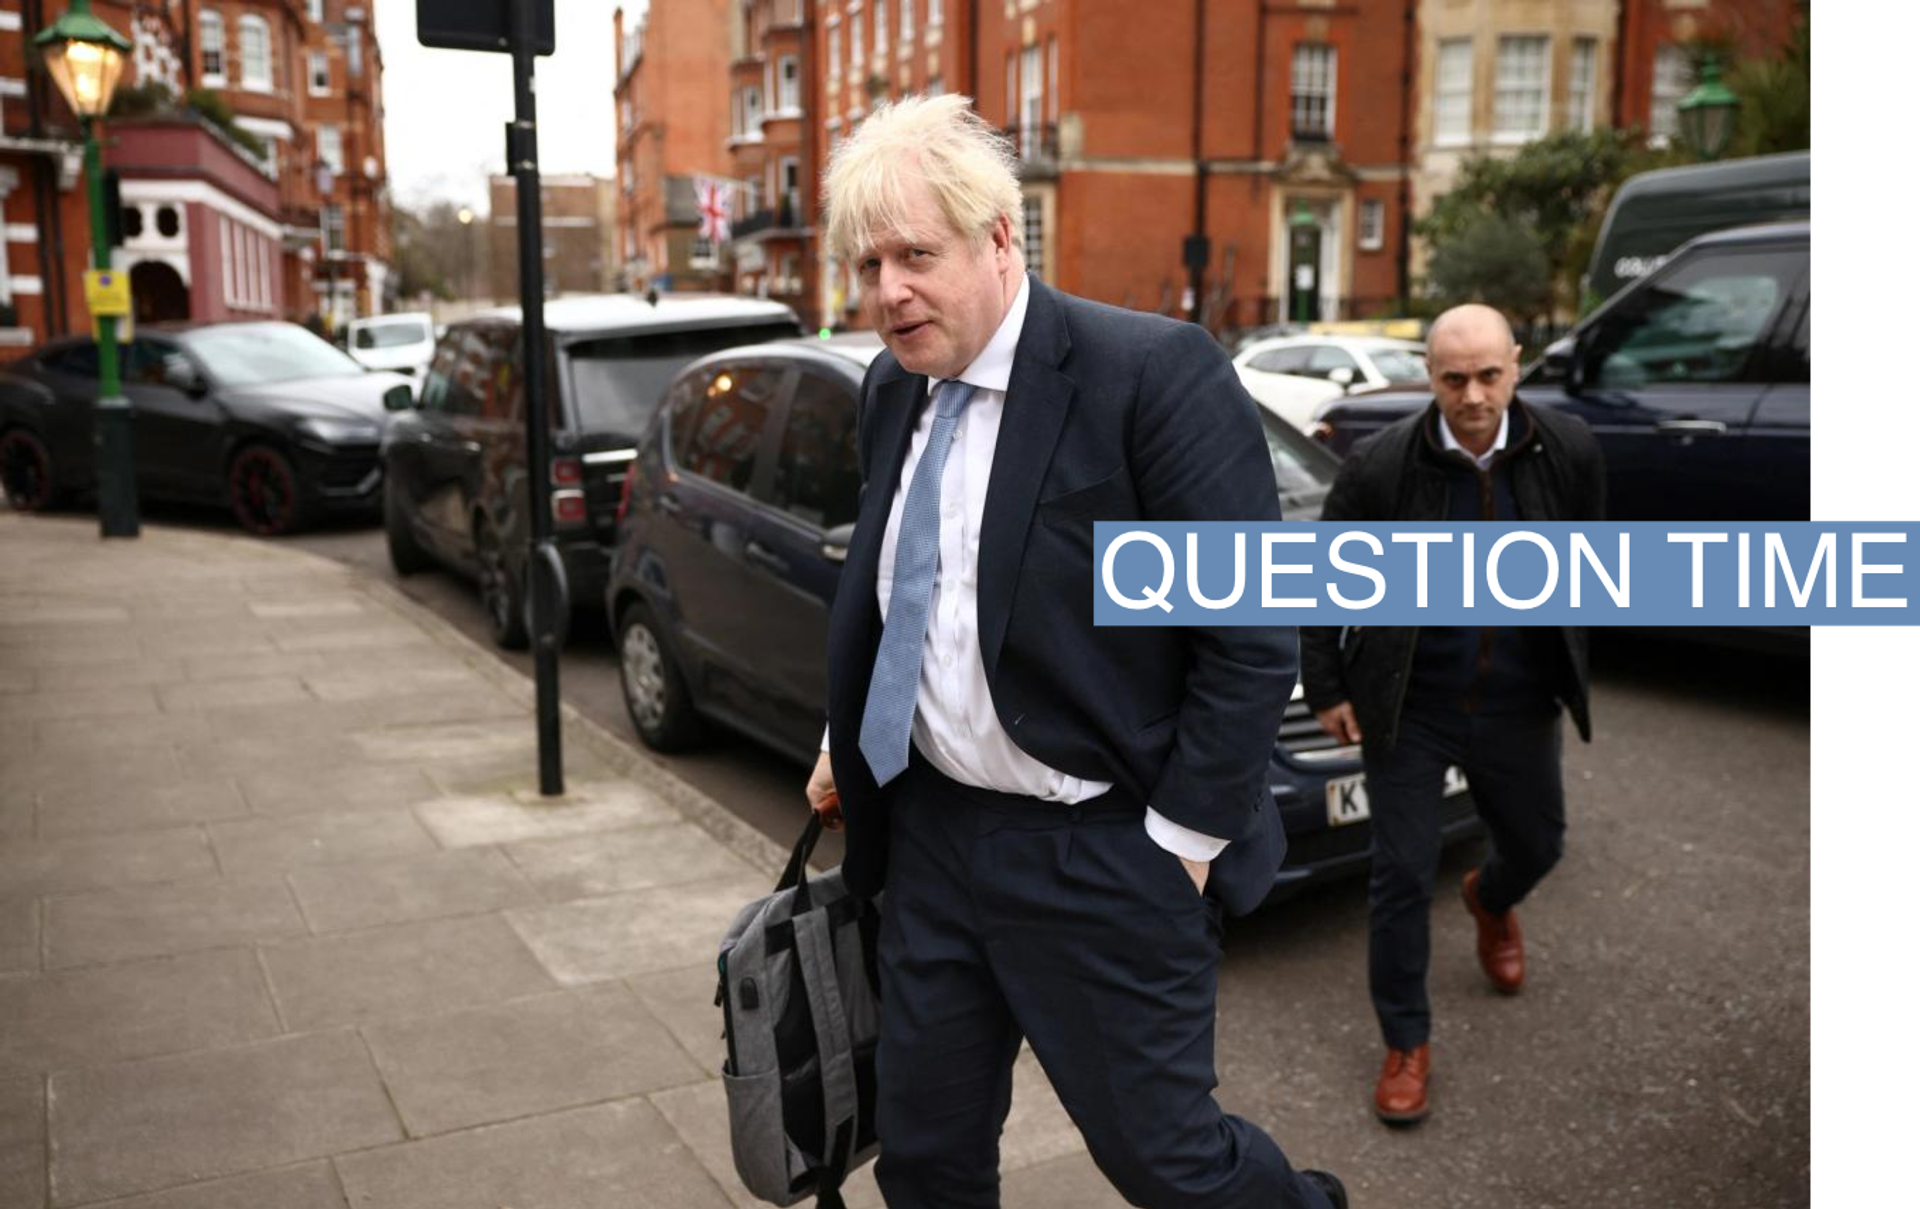 Former British Prime Minister Boris Johnson arrives at a residence in London, Britain, March 3, 2023. REUTERS/Henry Nicholls